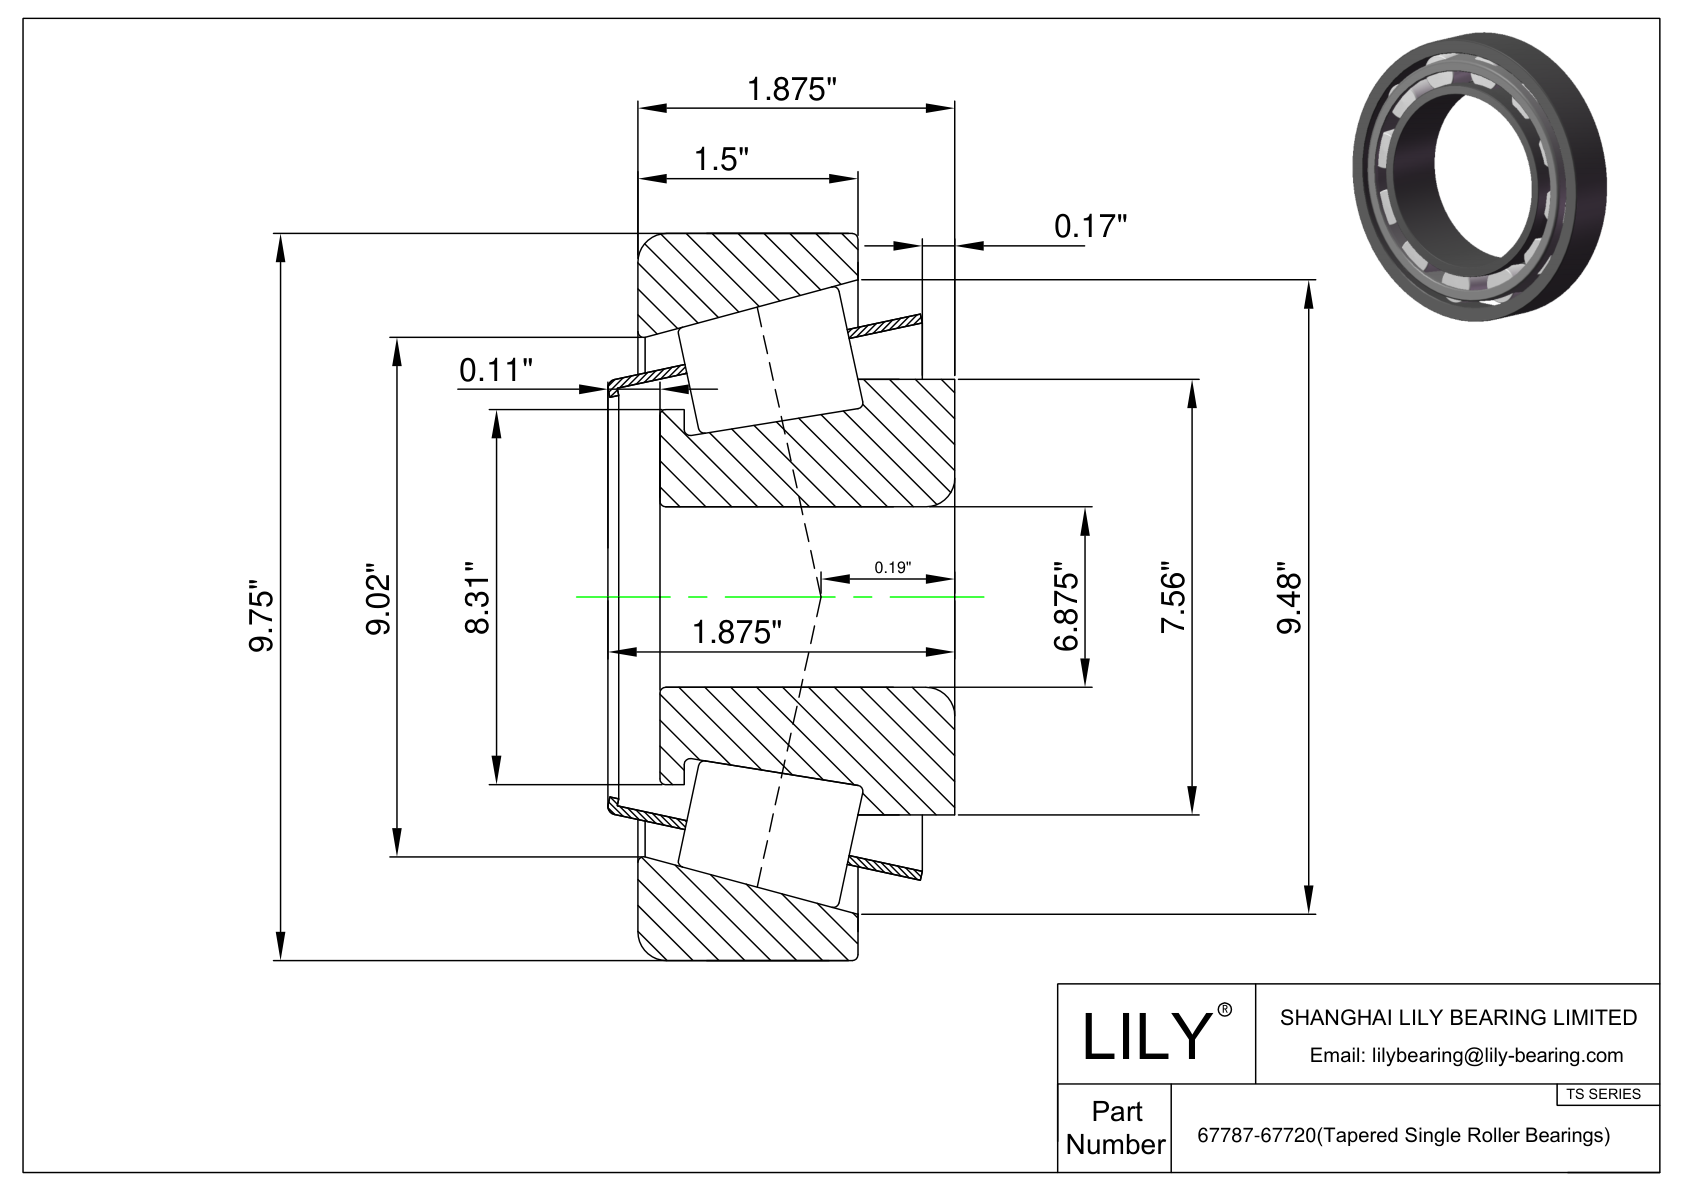 67787-67720 TS (Tapered Single Roller Bearings) (Imperial) cad drawing